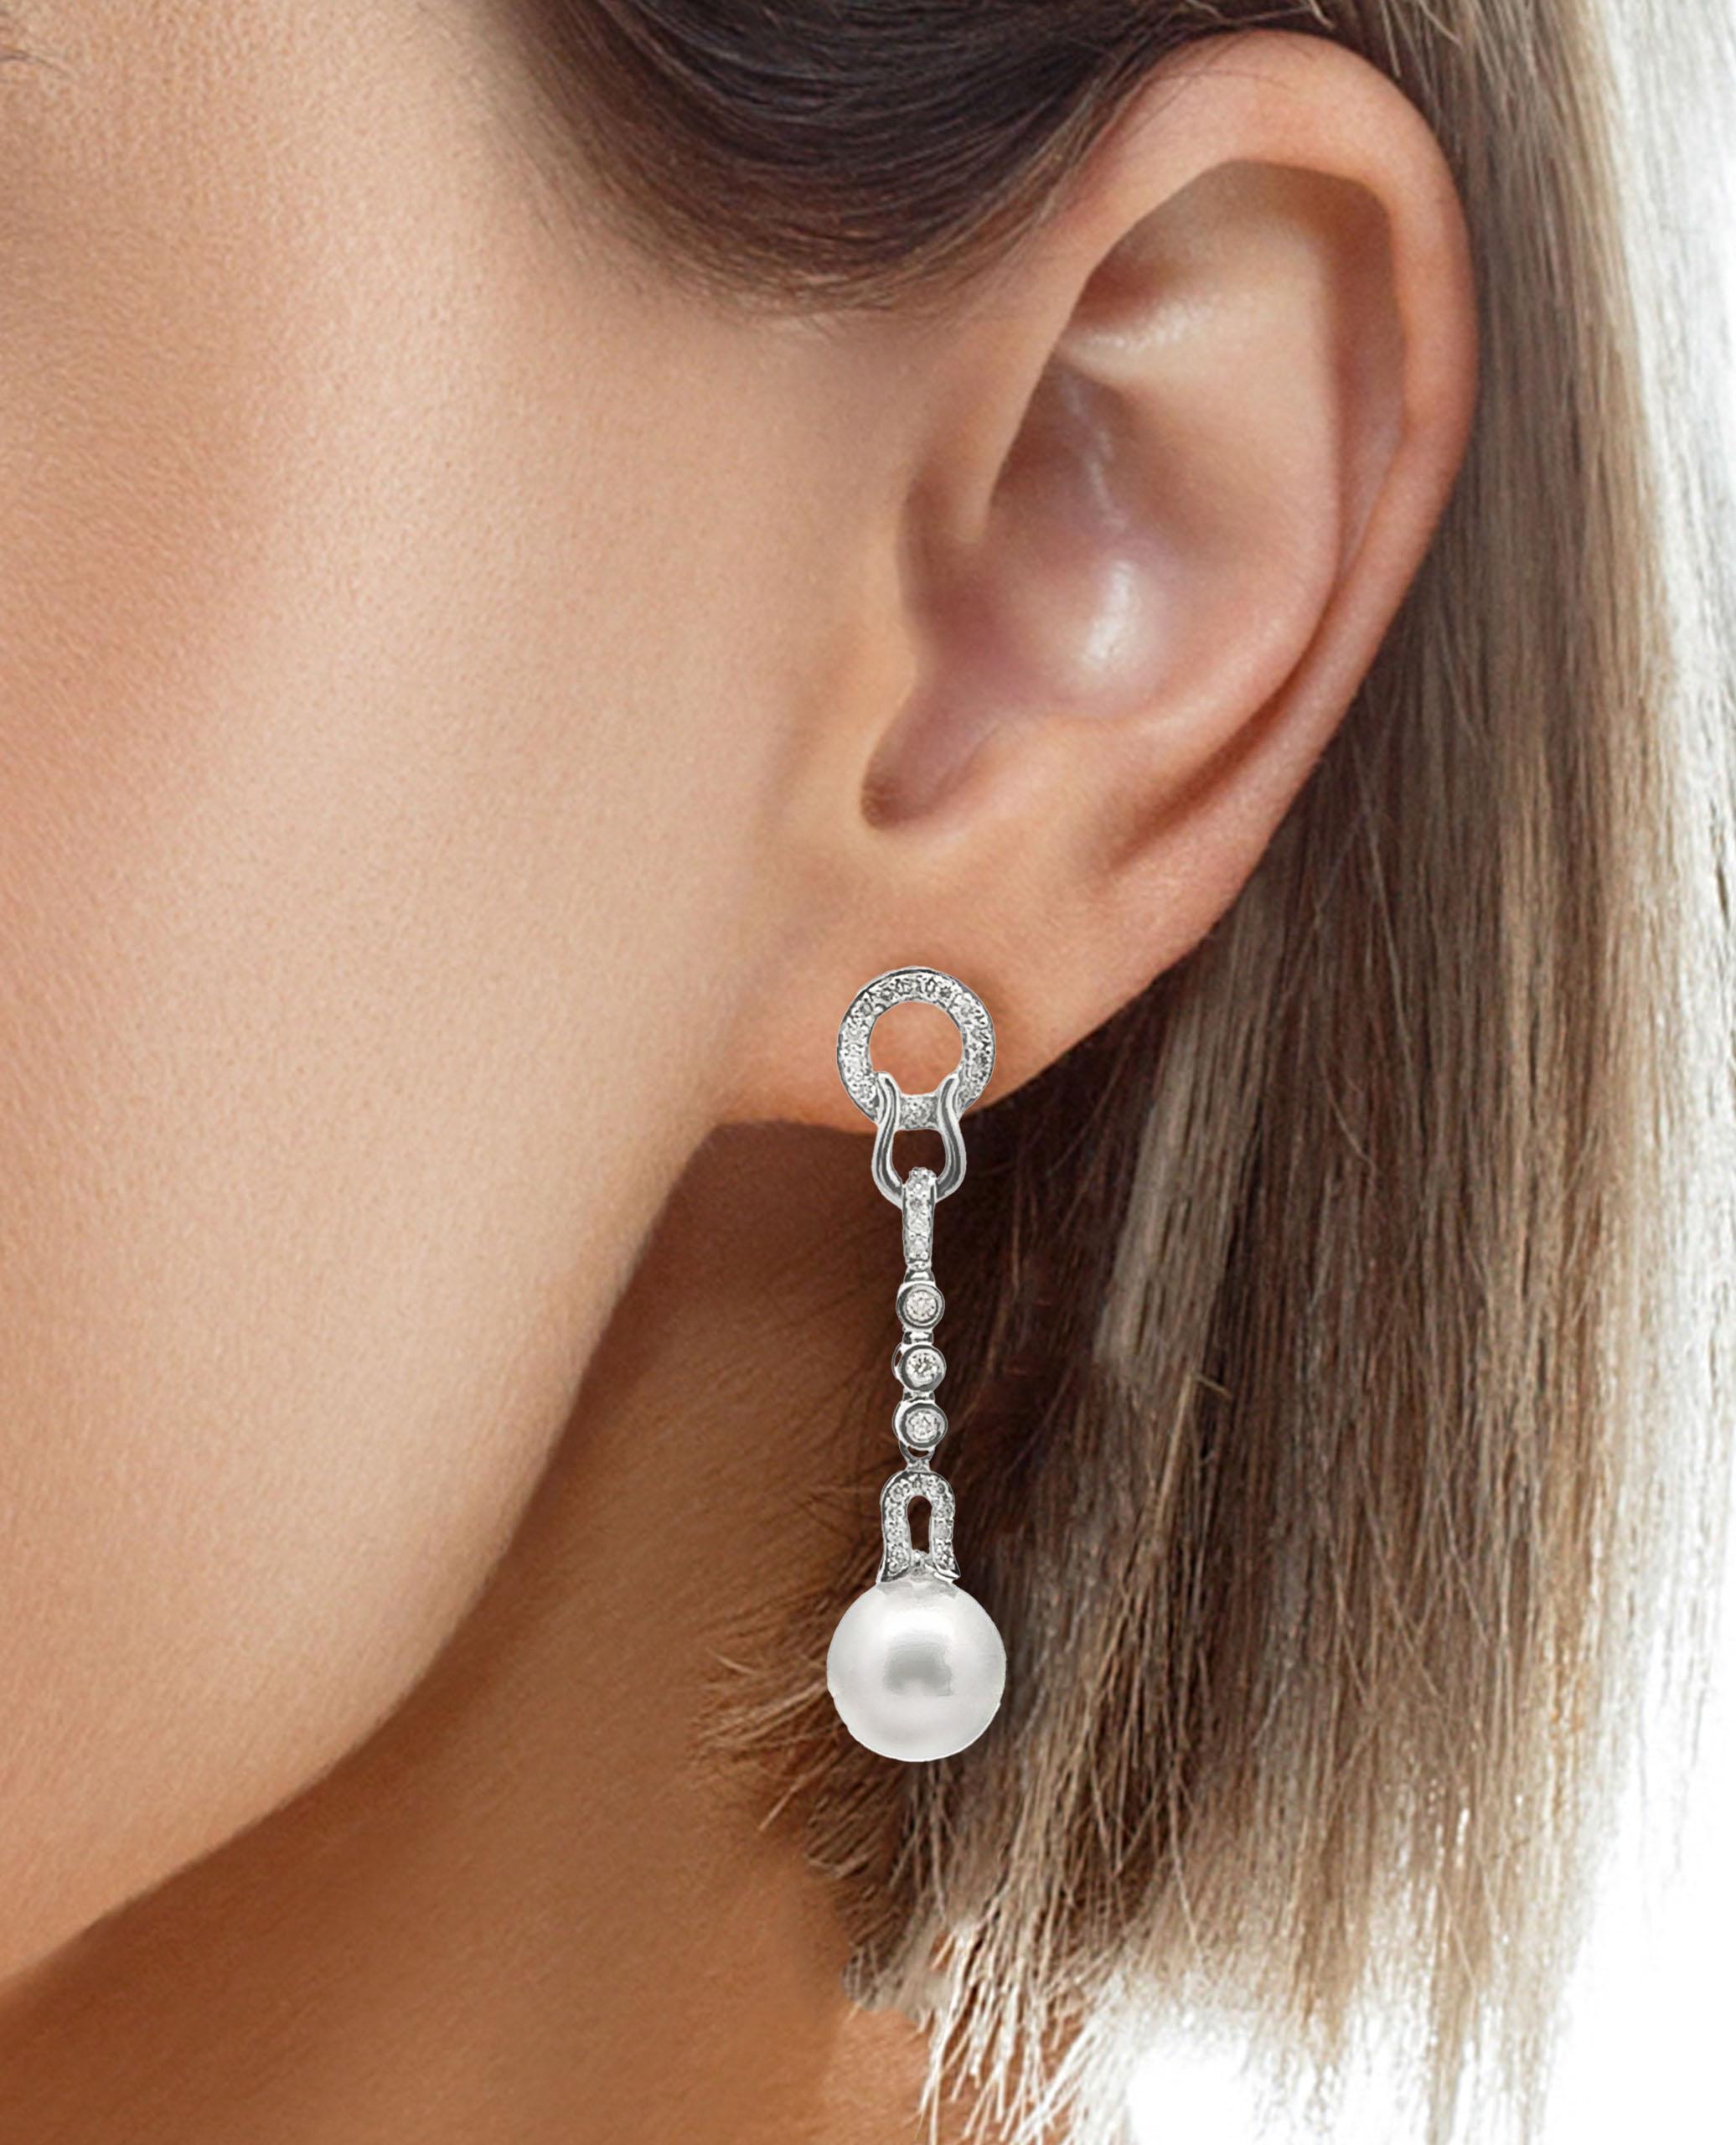 14K white gold dangle earrings with 0.40 carat diamonds and two 10mm South Sea pearls with silver undertones.

- Earring is 1.75 inches long